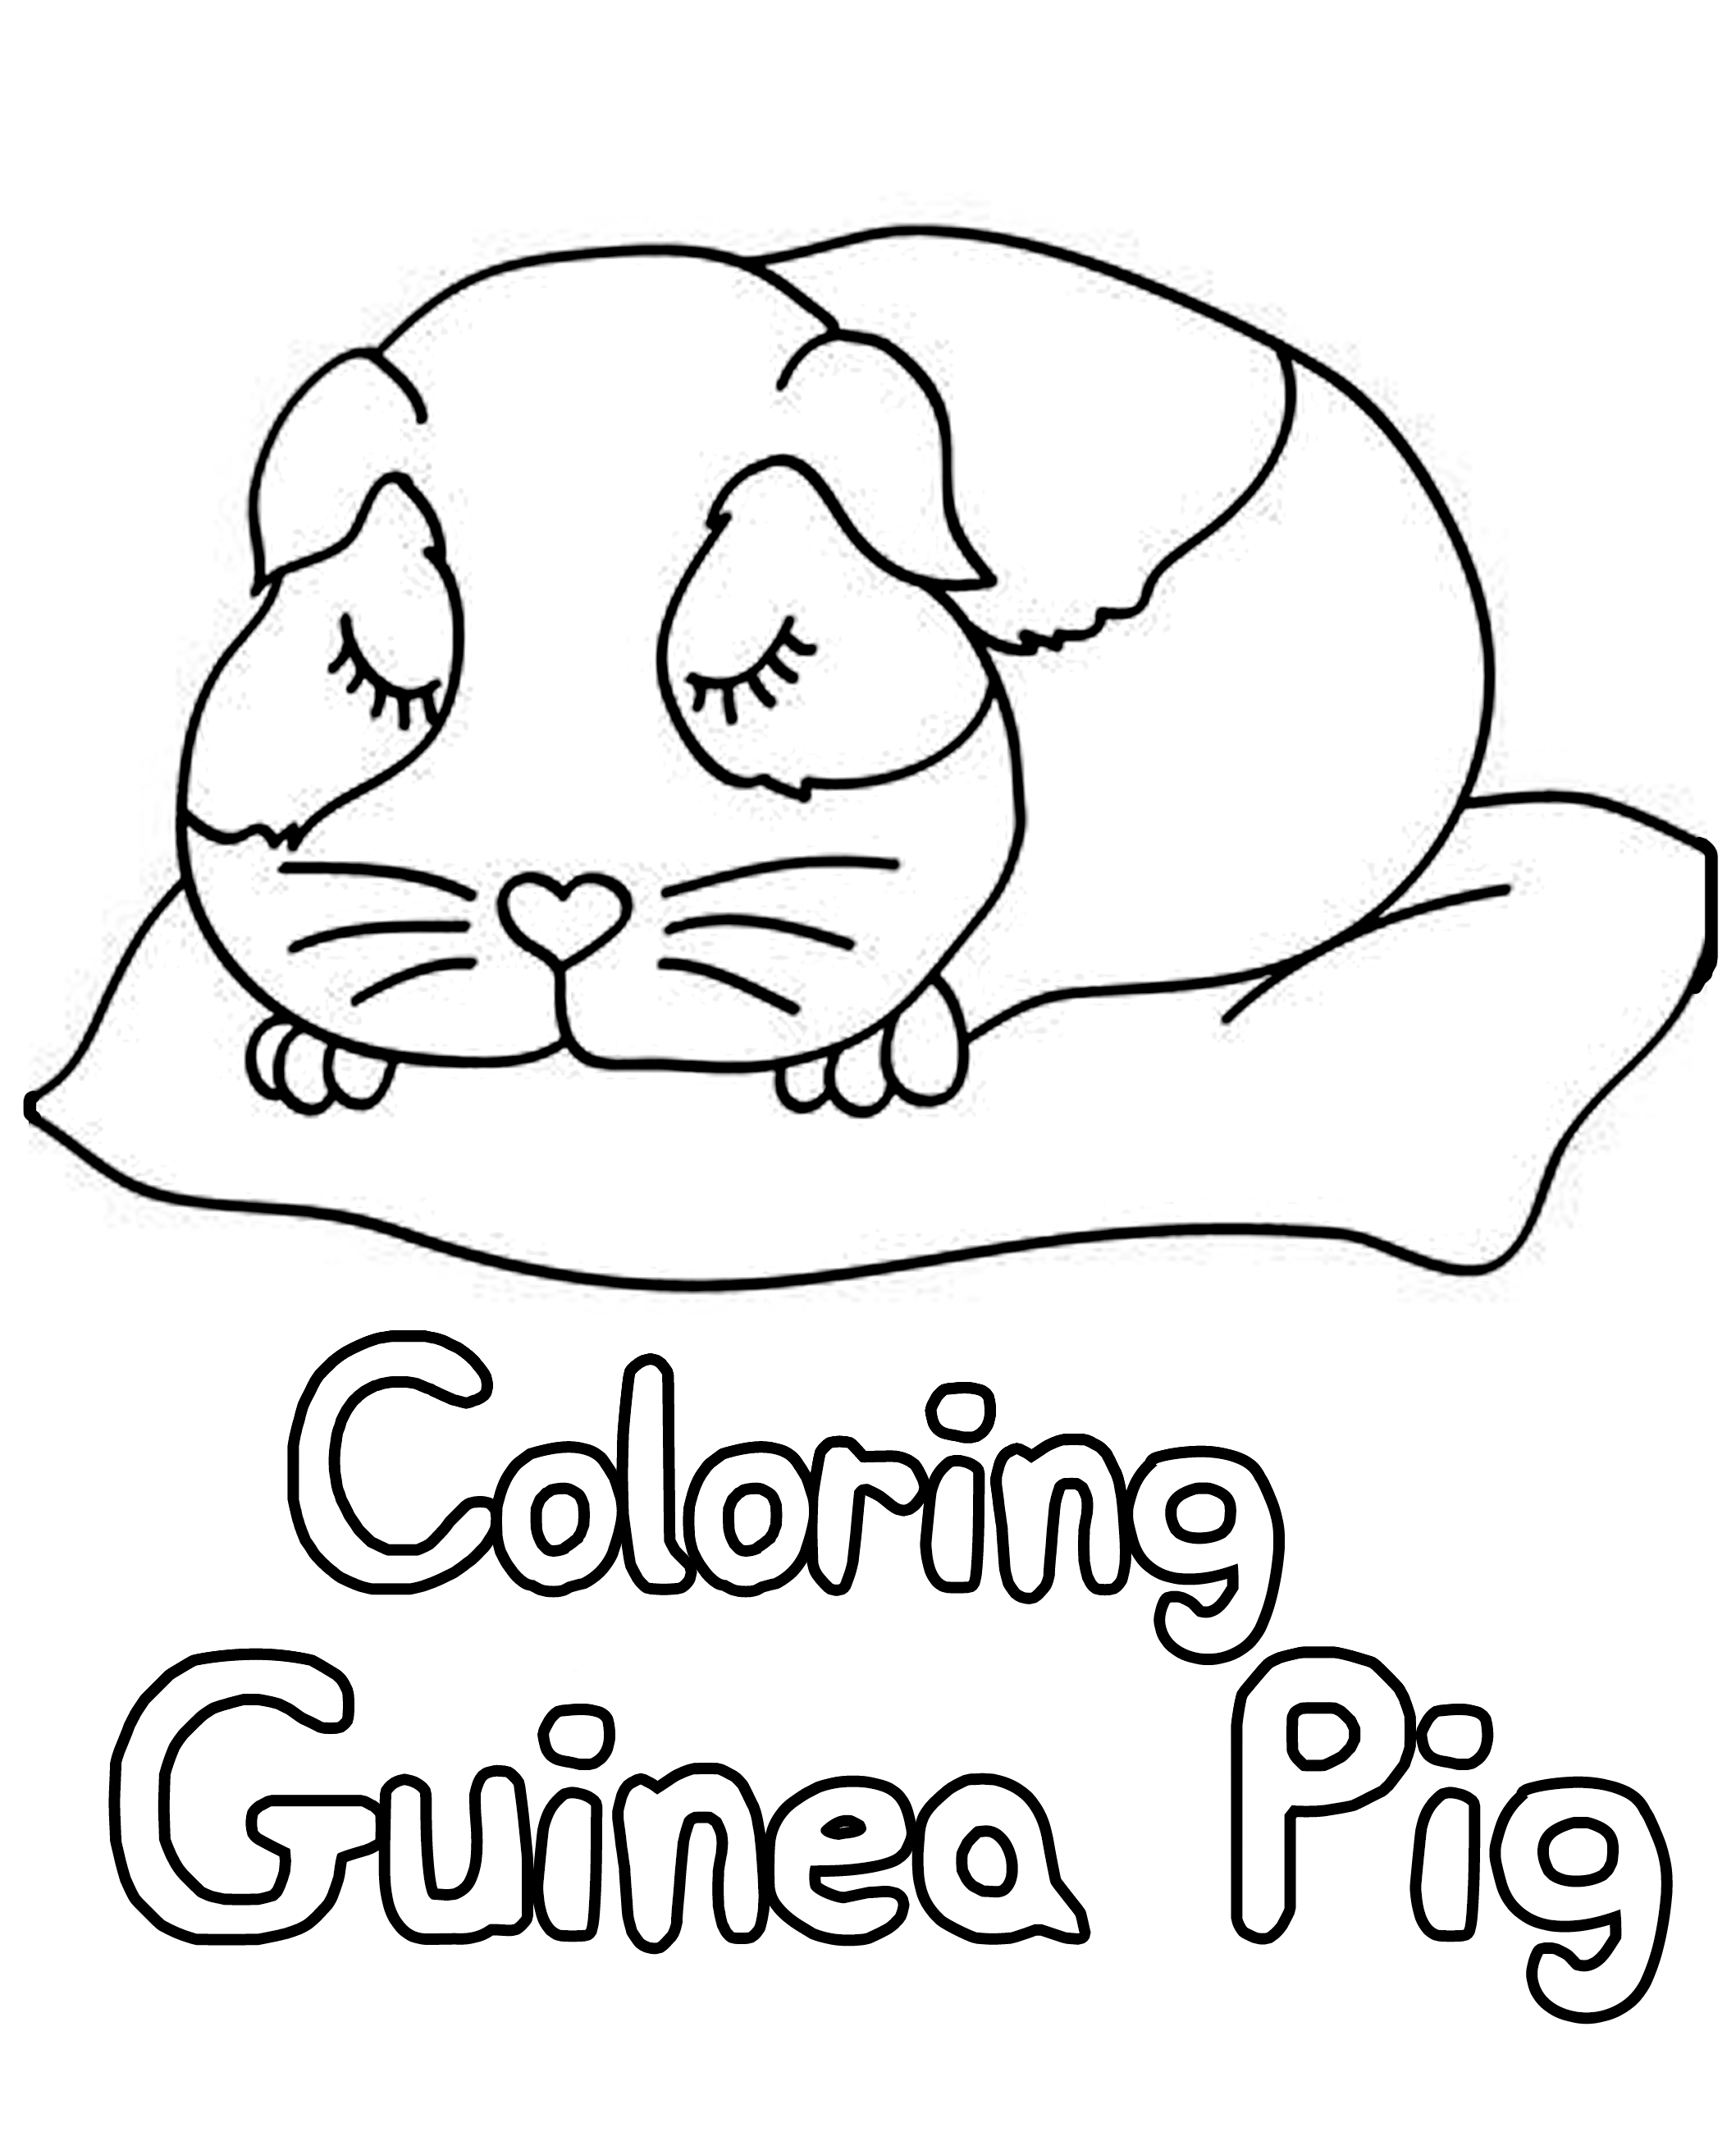 guinea pig coloring pages